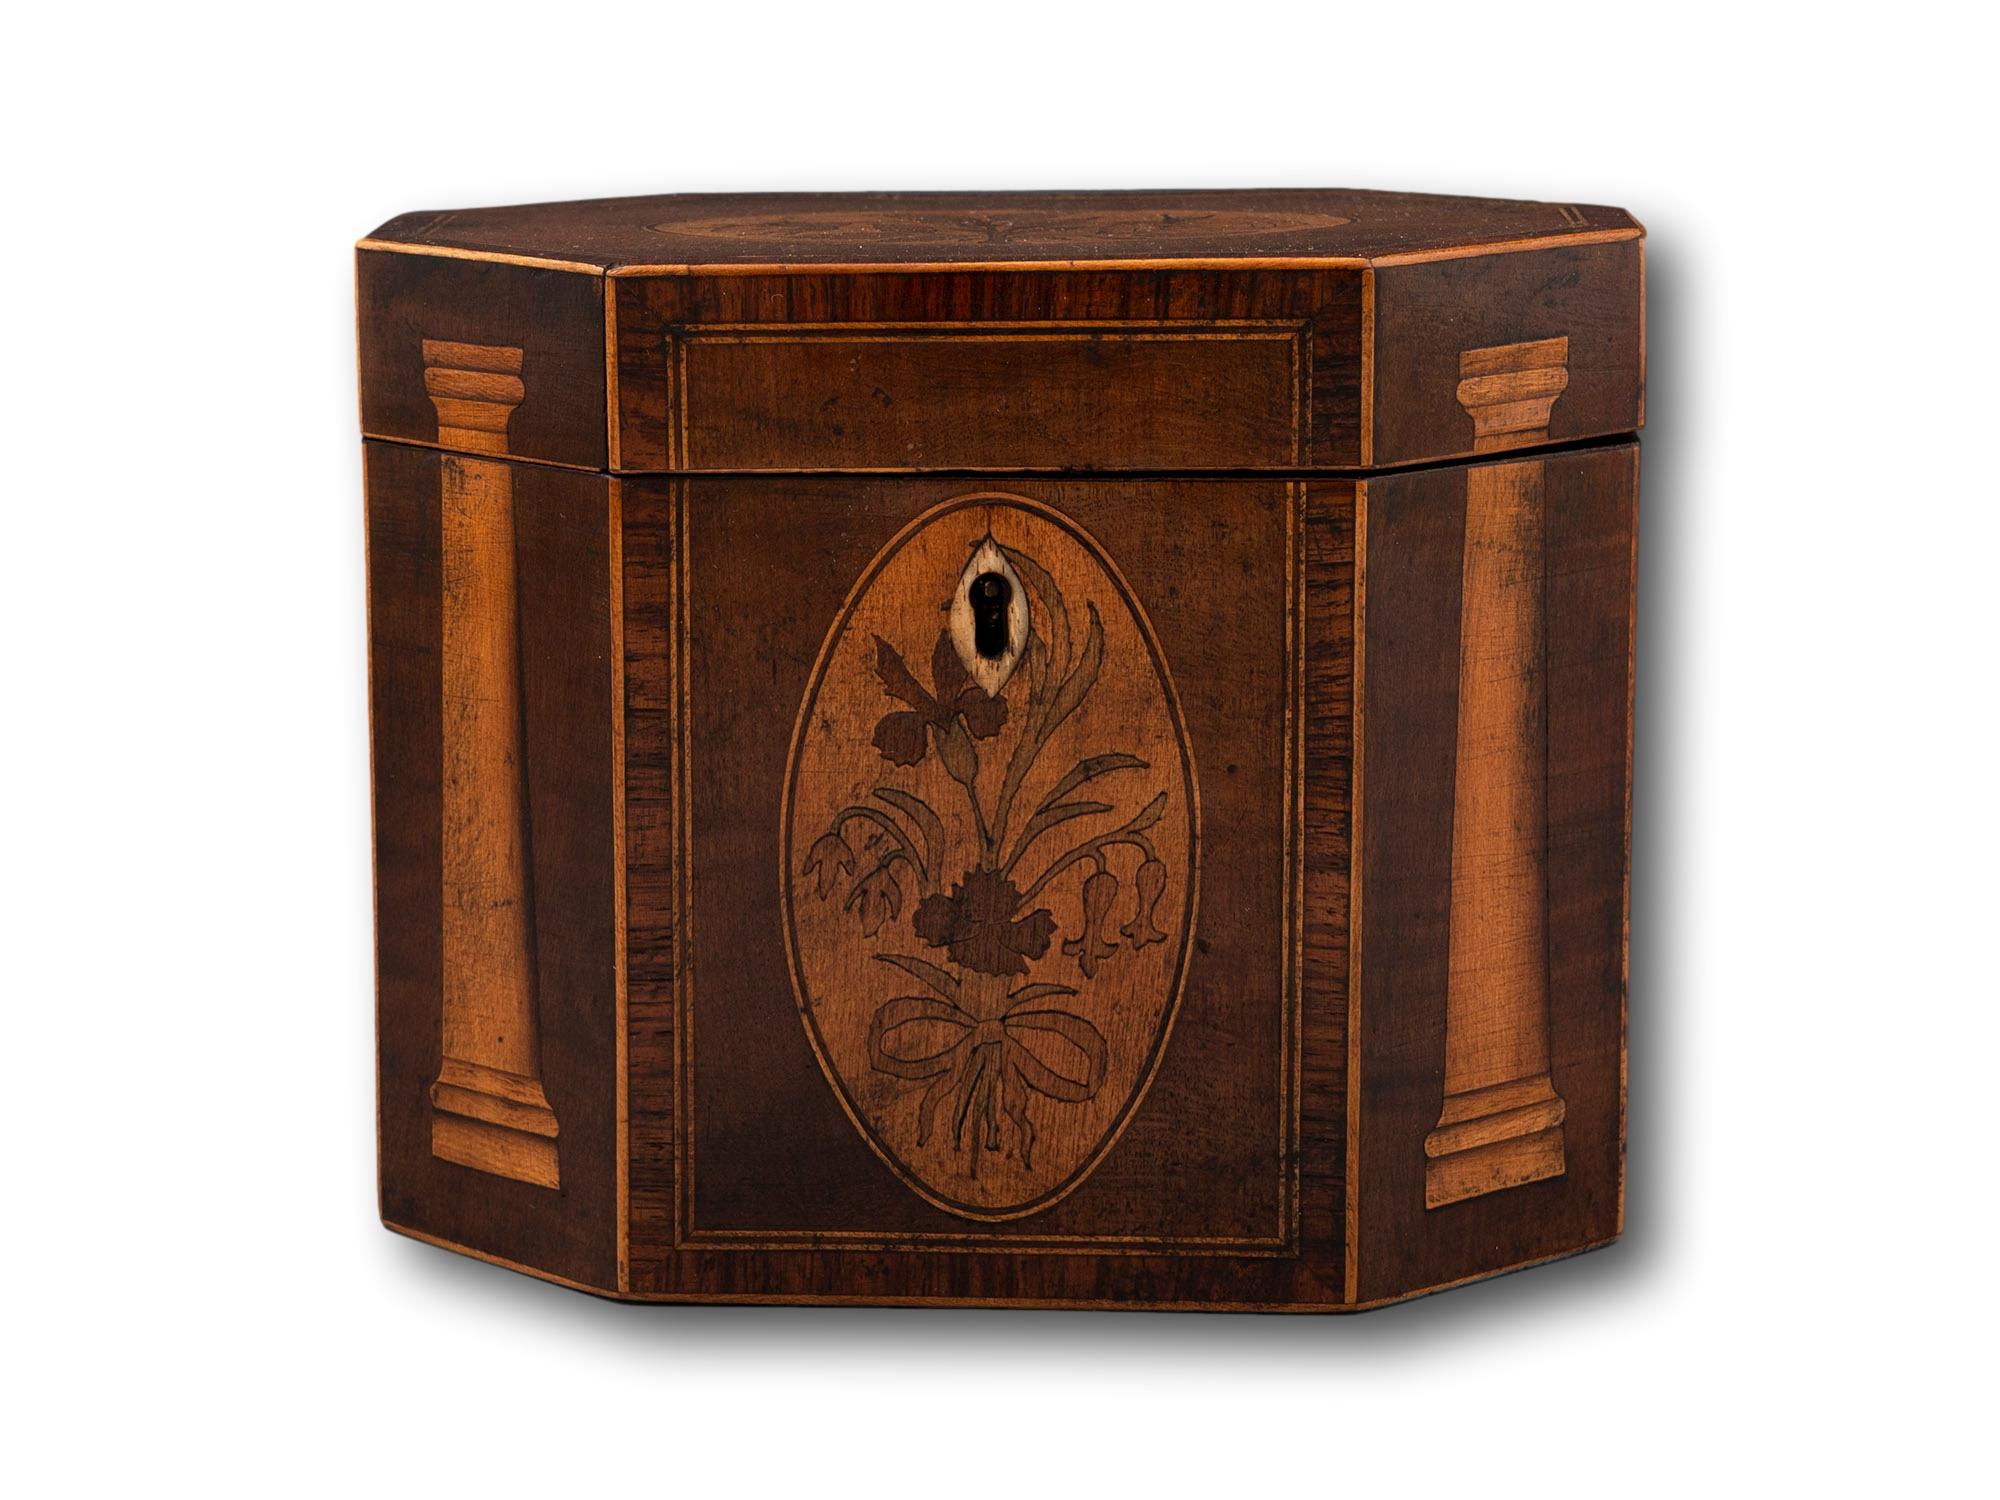 From our Tea Caddy collection, we are pleased to offer this Georgian octagonal Inlaid Tea Caddy. The Tea Caddy of octagonal form veneered in Harewood with inlaid twin Tuscan Columns to the exterior surrounding a central oval cartouche with a